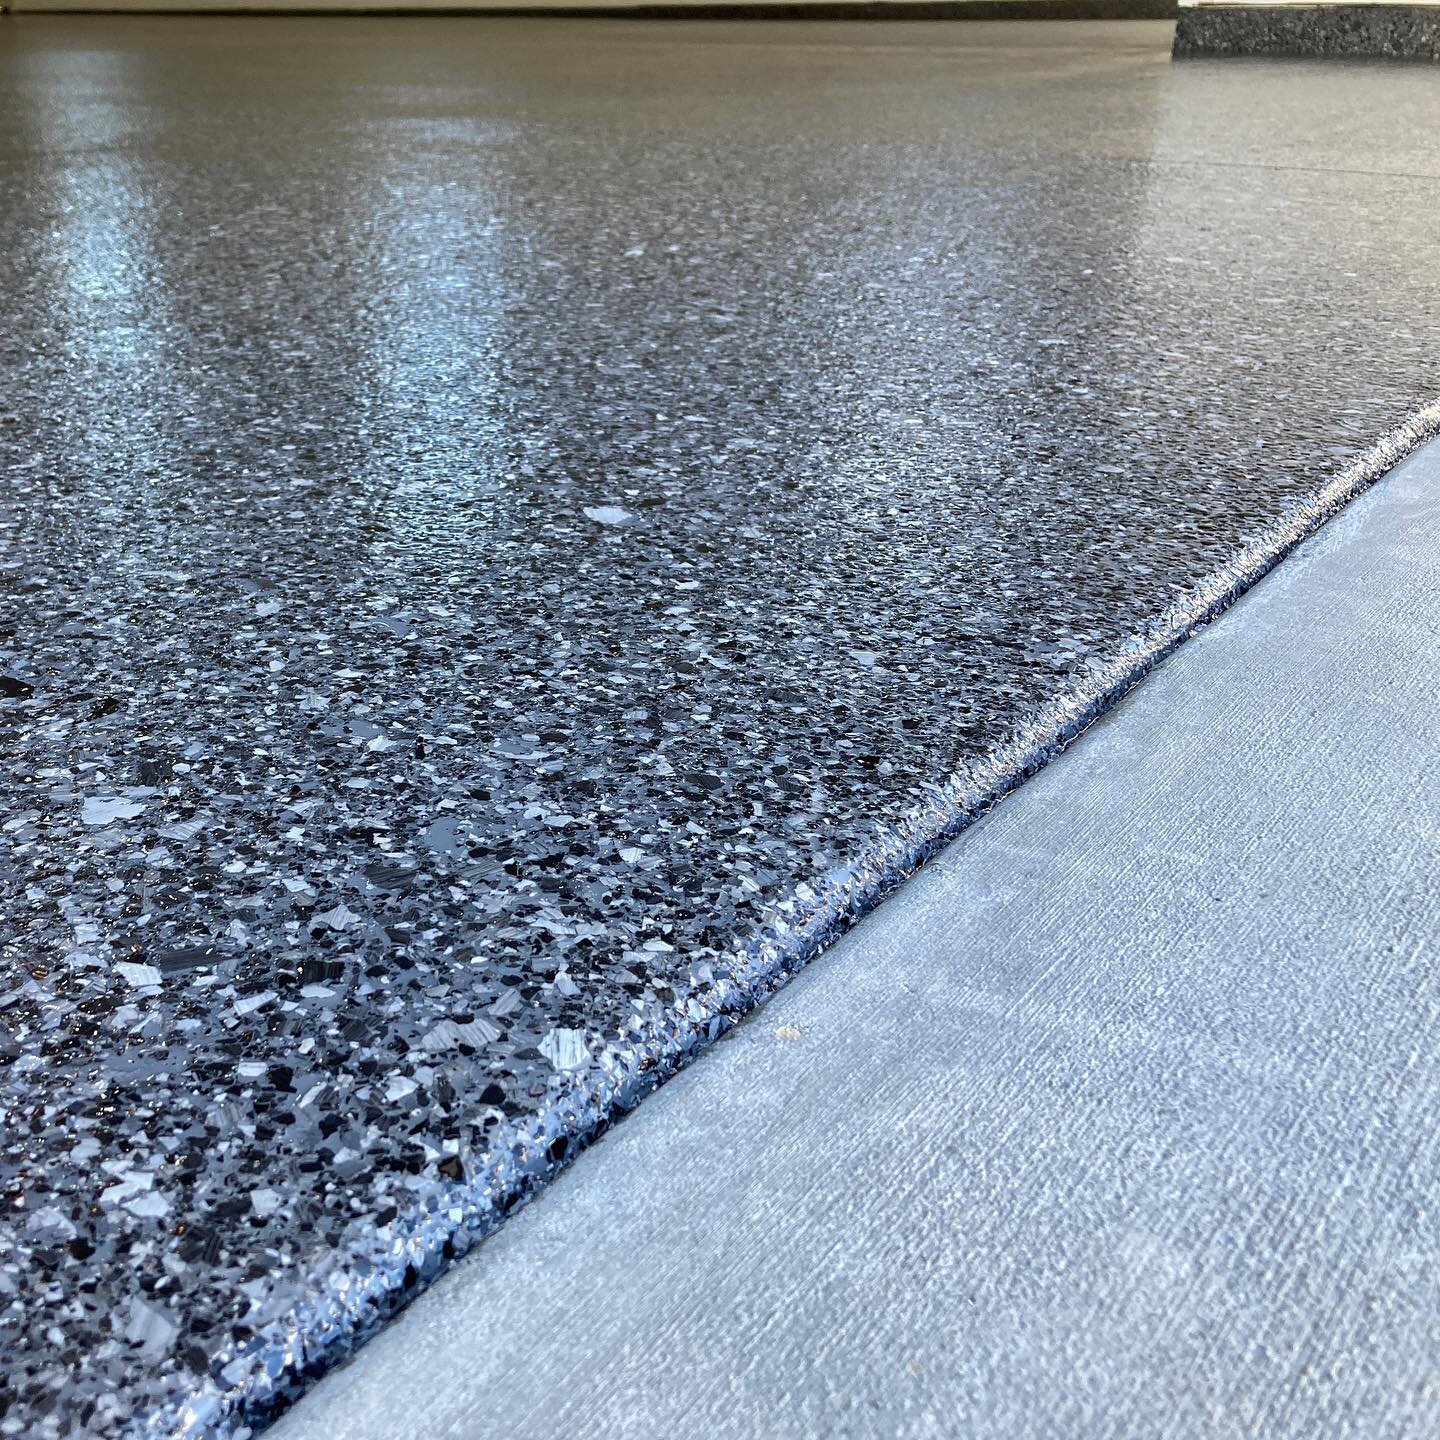 👀 Woah! 🤯 

Our Brindle Epoxy System just hits different! The combo of large and small flakes with the subtle striping effect create a unique, one of a kind look. Oh, and it&rsquo;s durable AF!💪

👉Brindle Epoxy System
👉Custom Color: LANAI GREY &